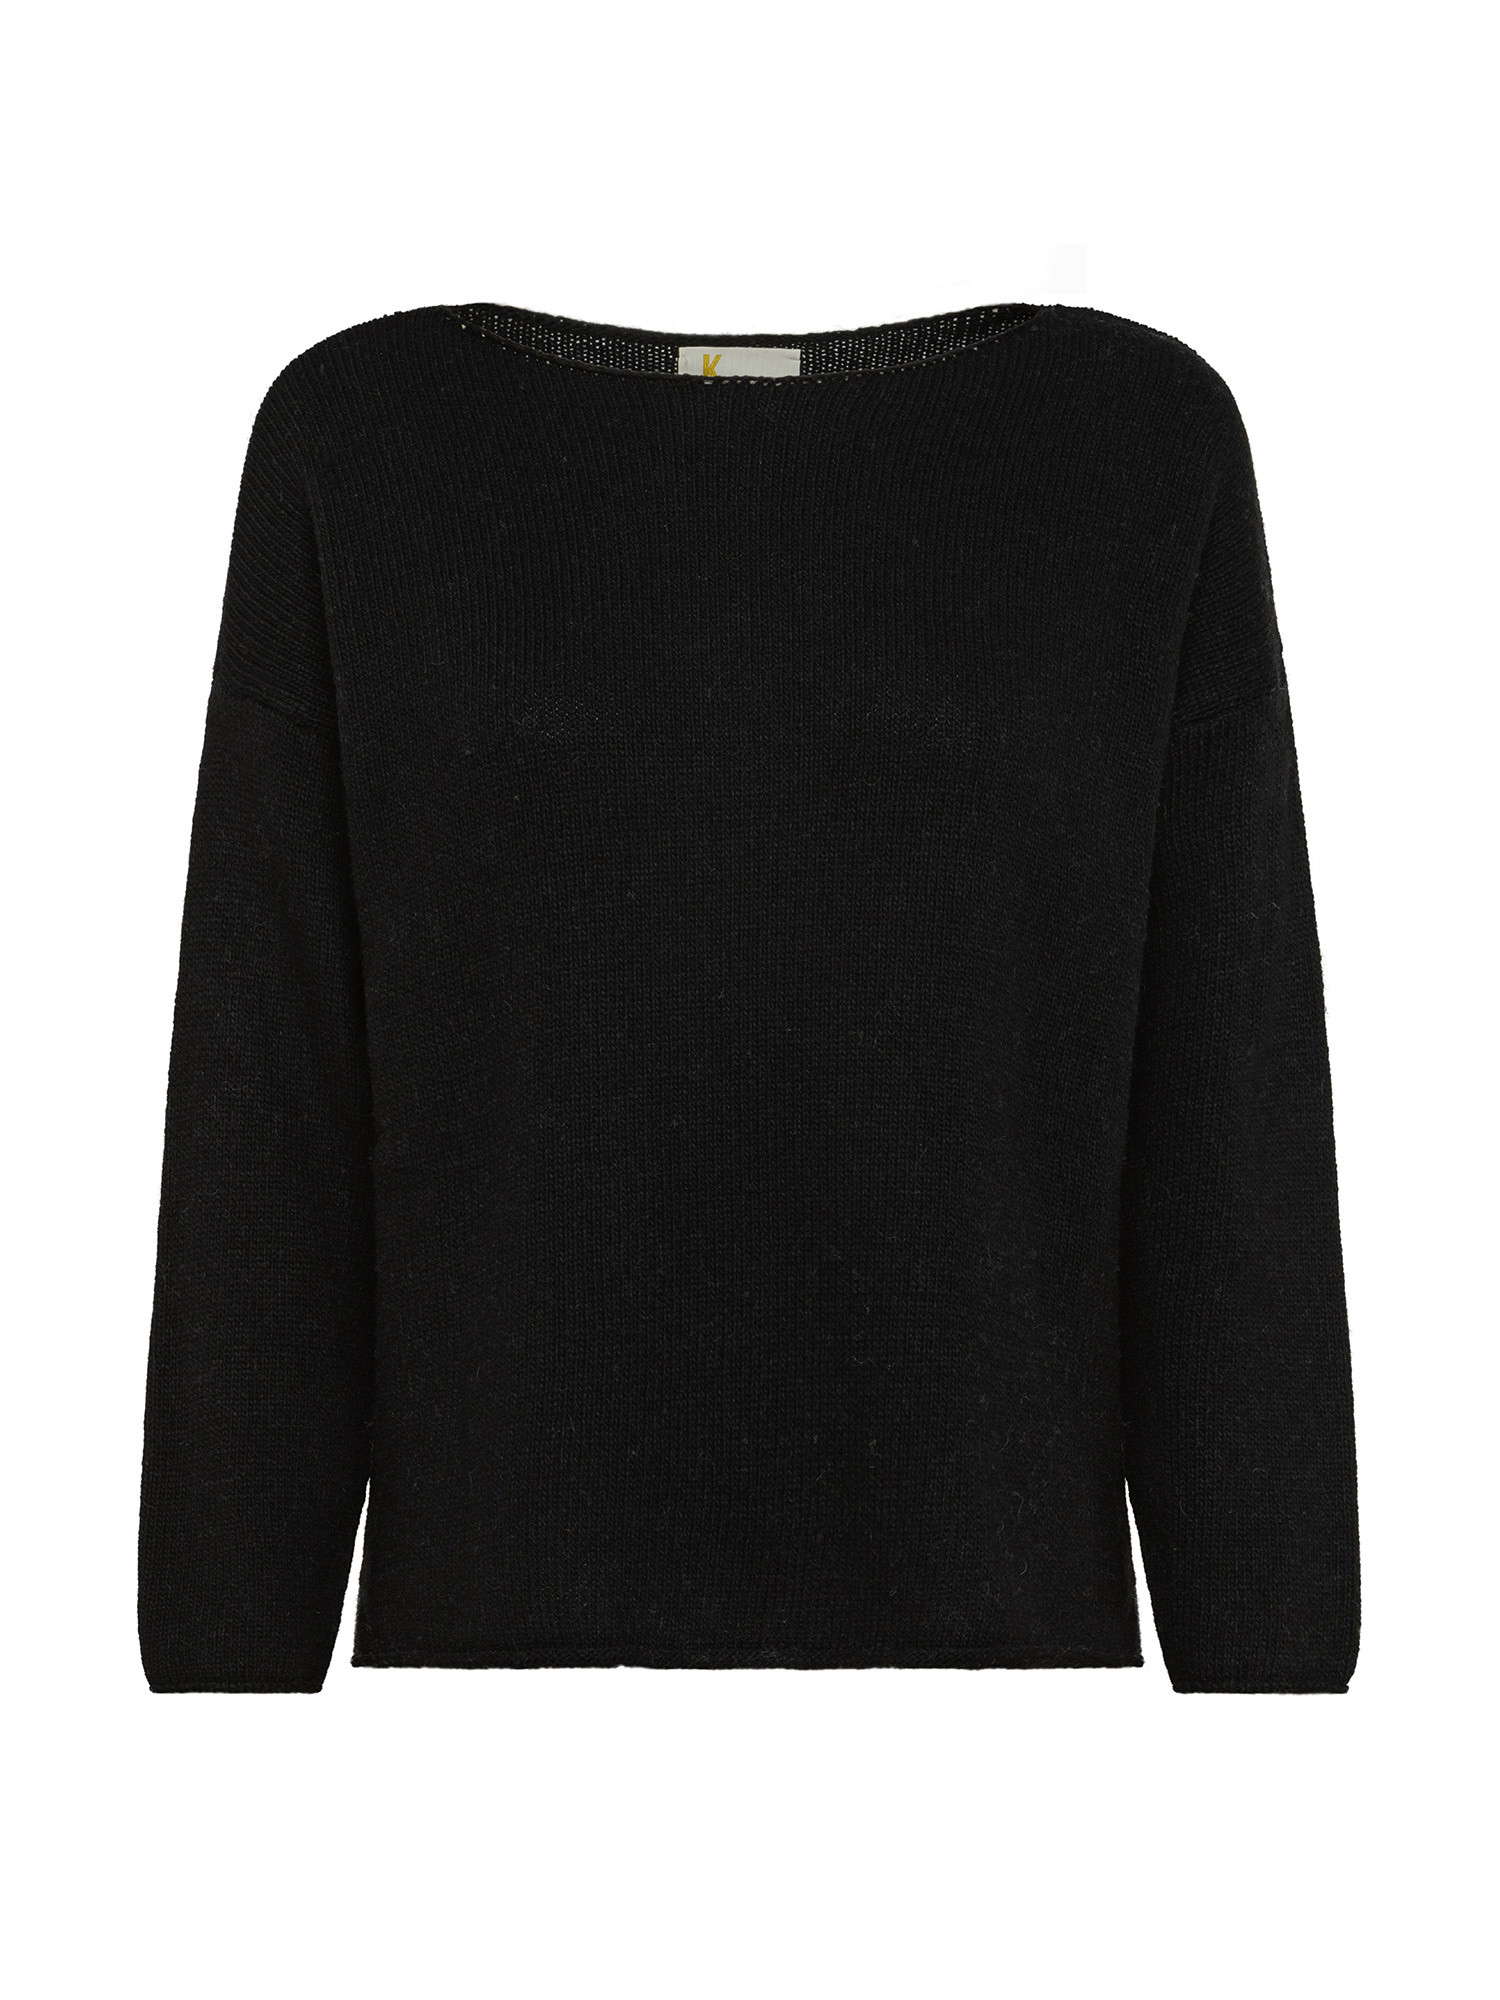 K Collection - Over sweater, Black, large image number 0